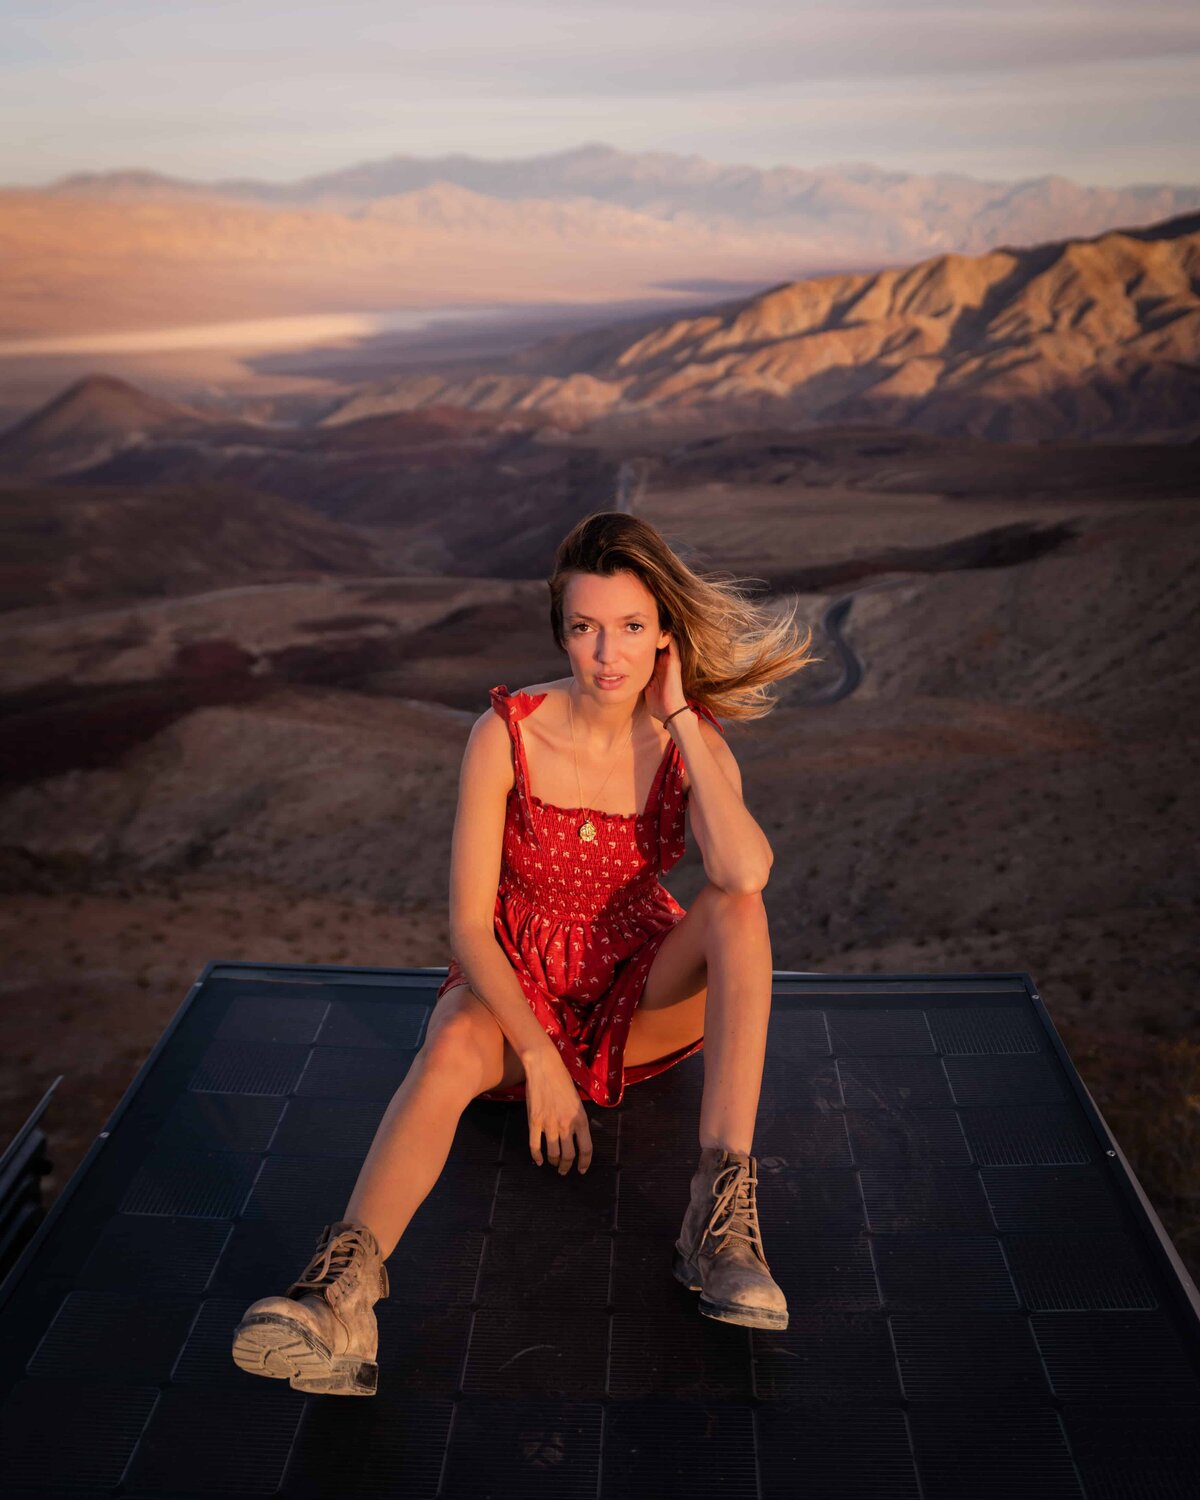 Woman in a red dress sitting on the ground with mountains in the background